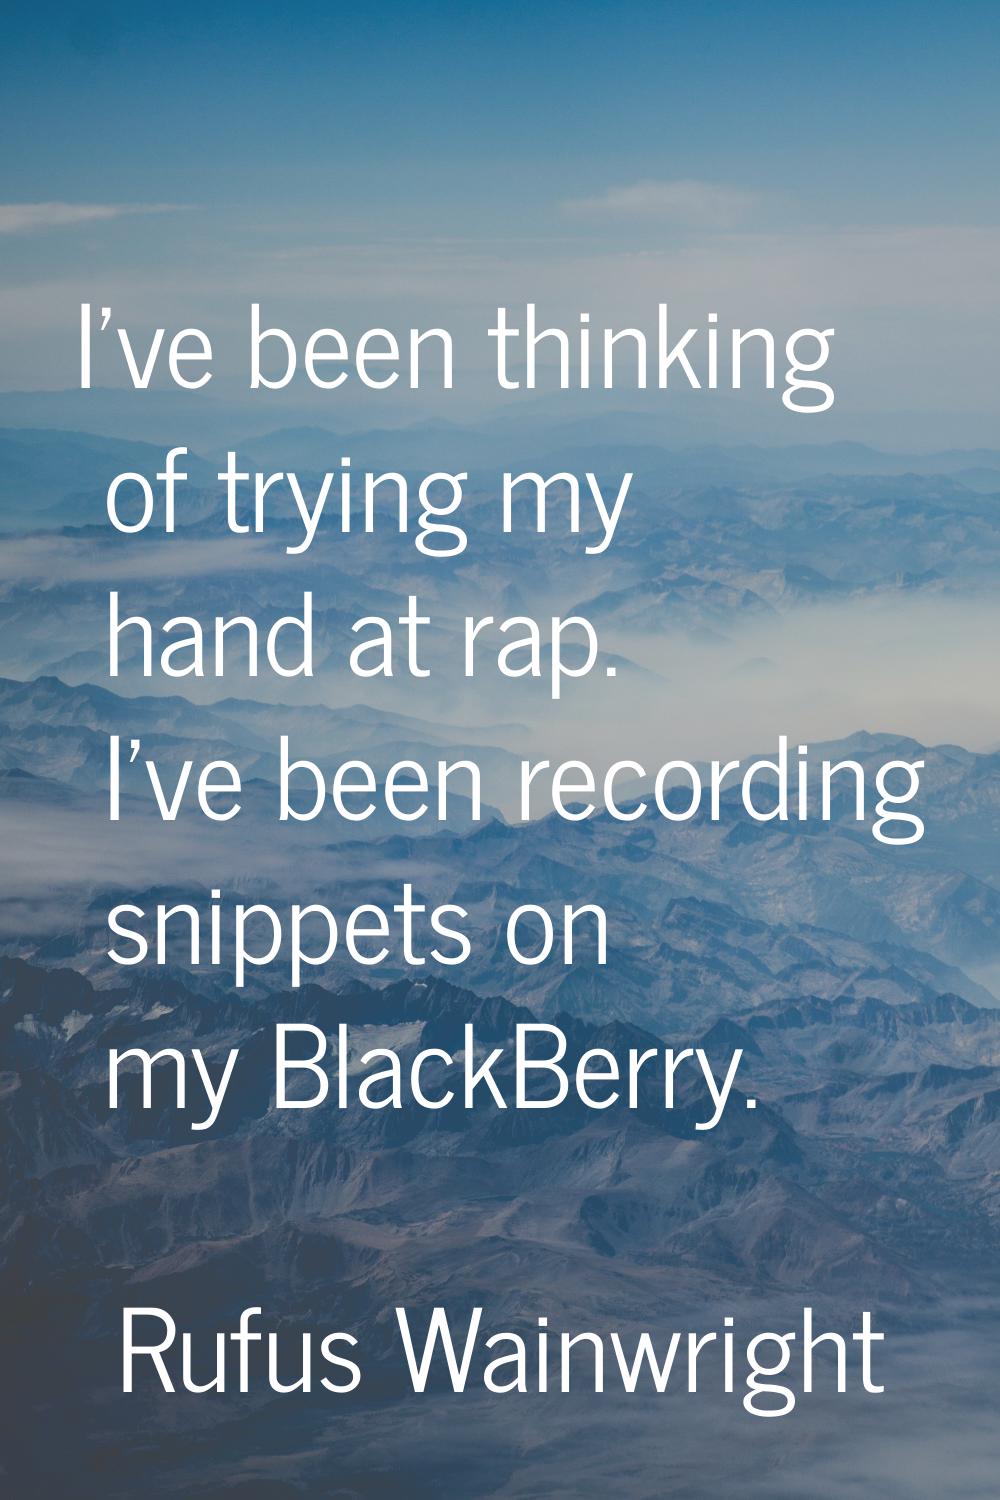 I've been thinking of trying my hand at rap. I've been recording snippets on my BlackBerry.